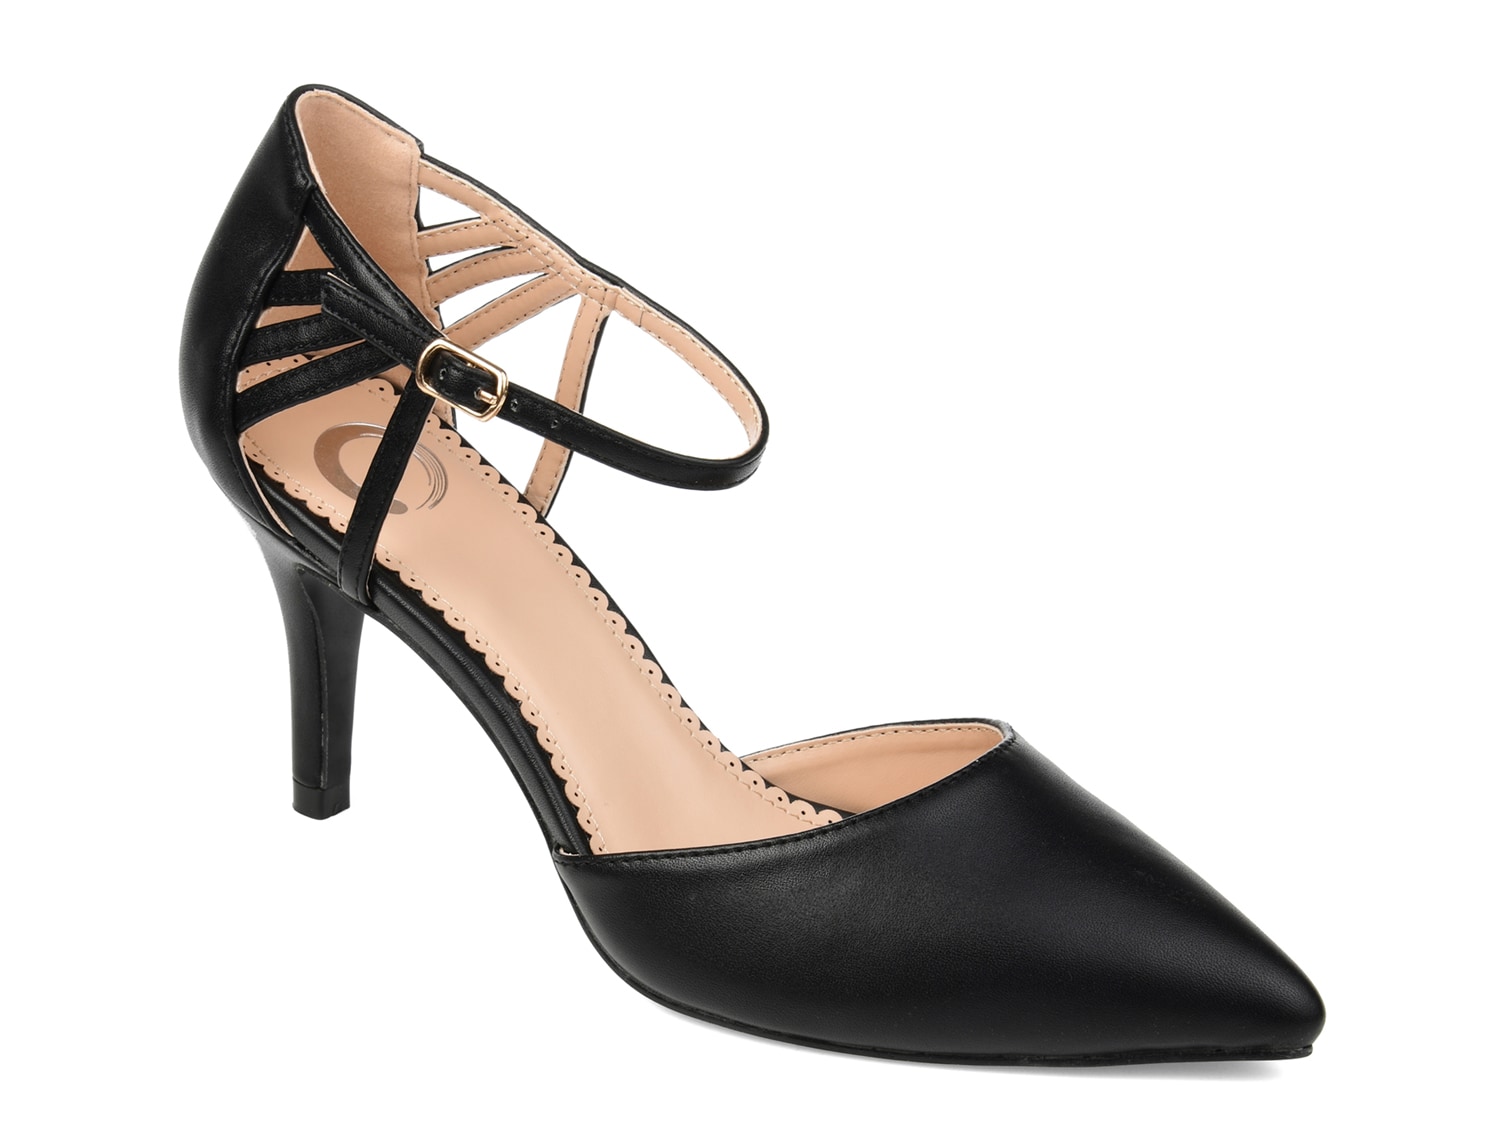 Journee Collection Mia Pump - Free Shipping | DSW